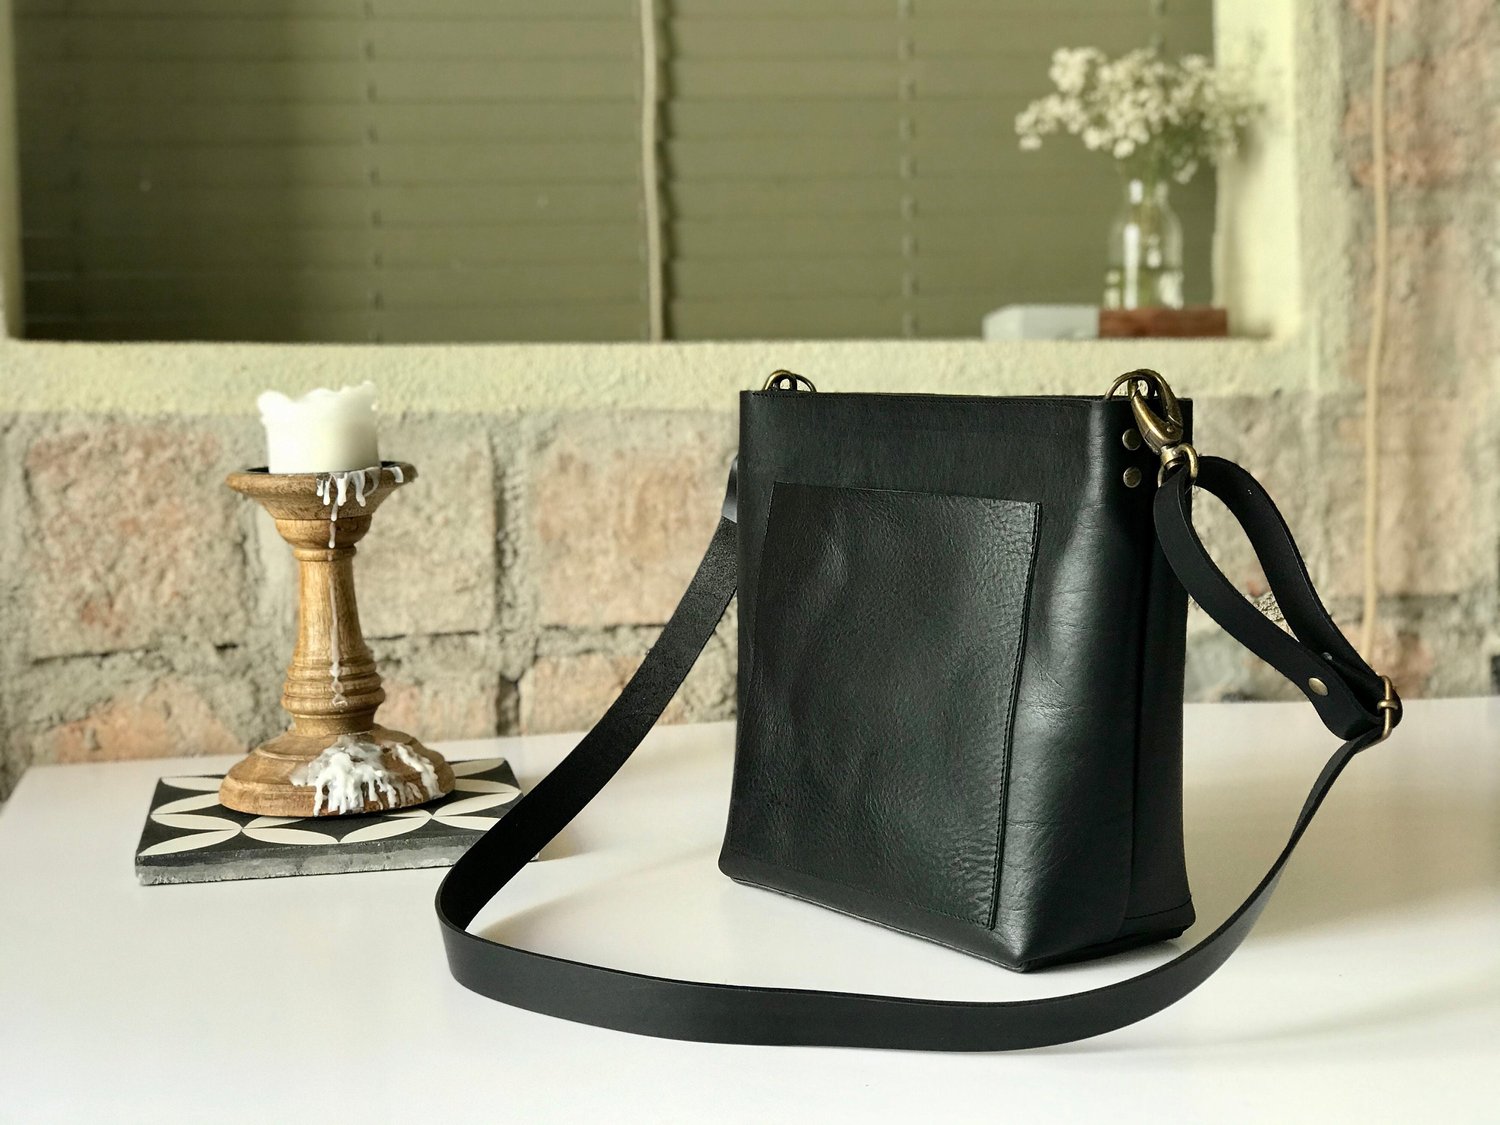 Bags, Crossbody & Black Leather Bags